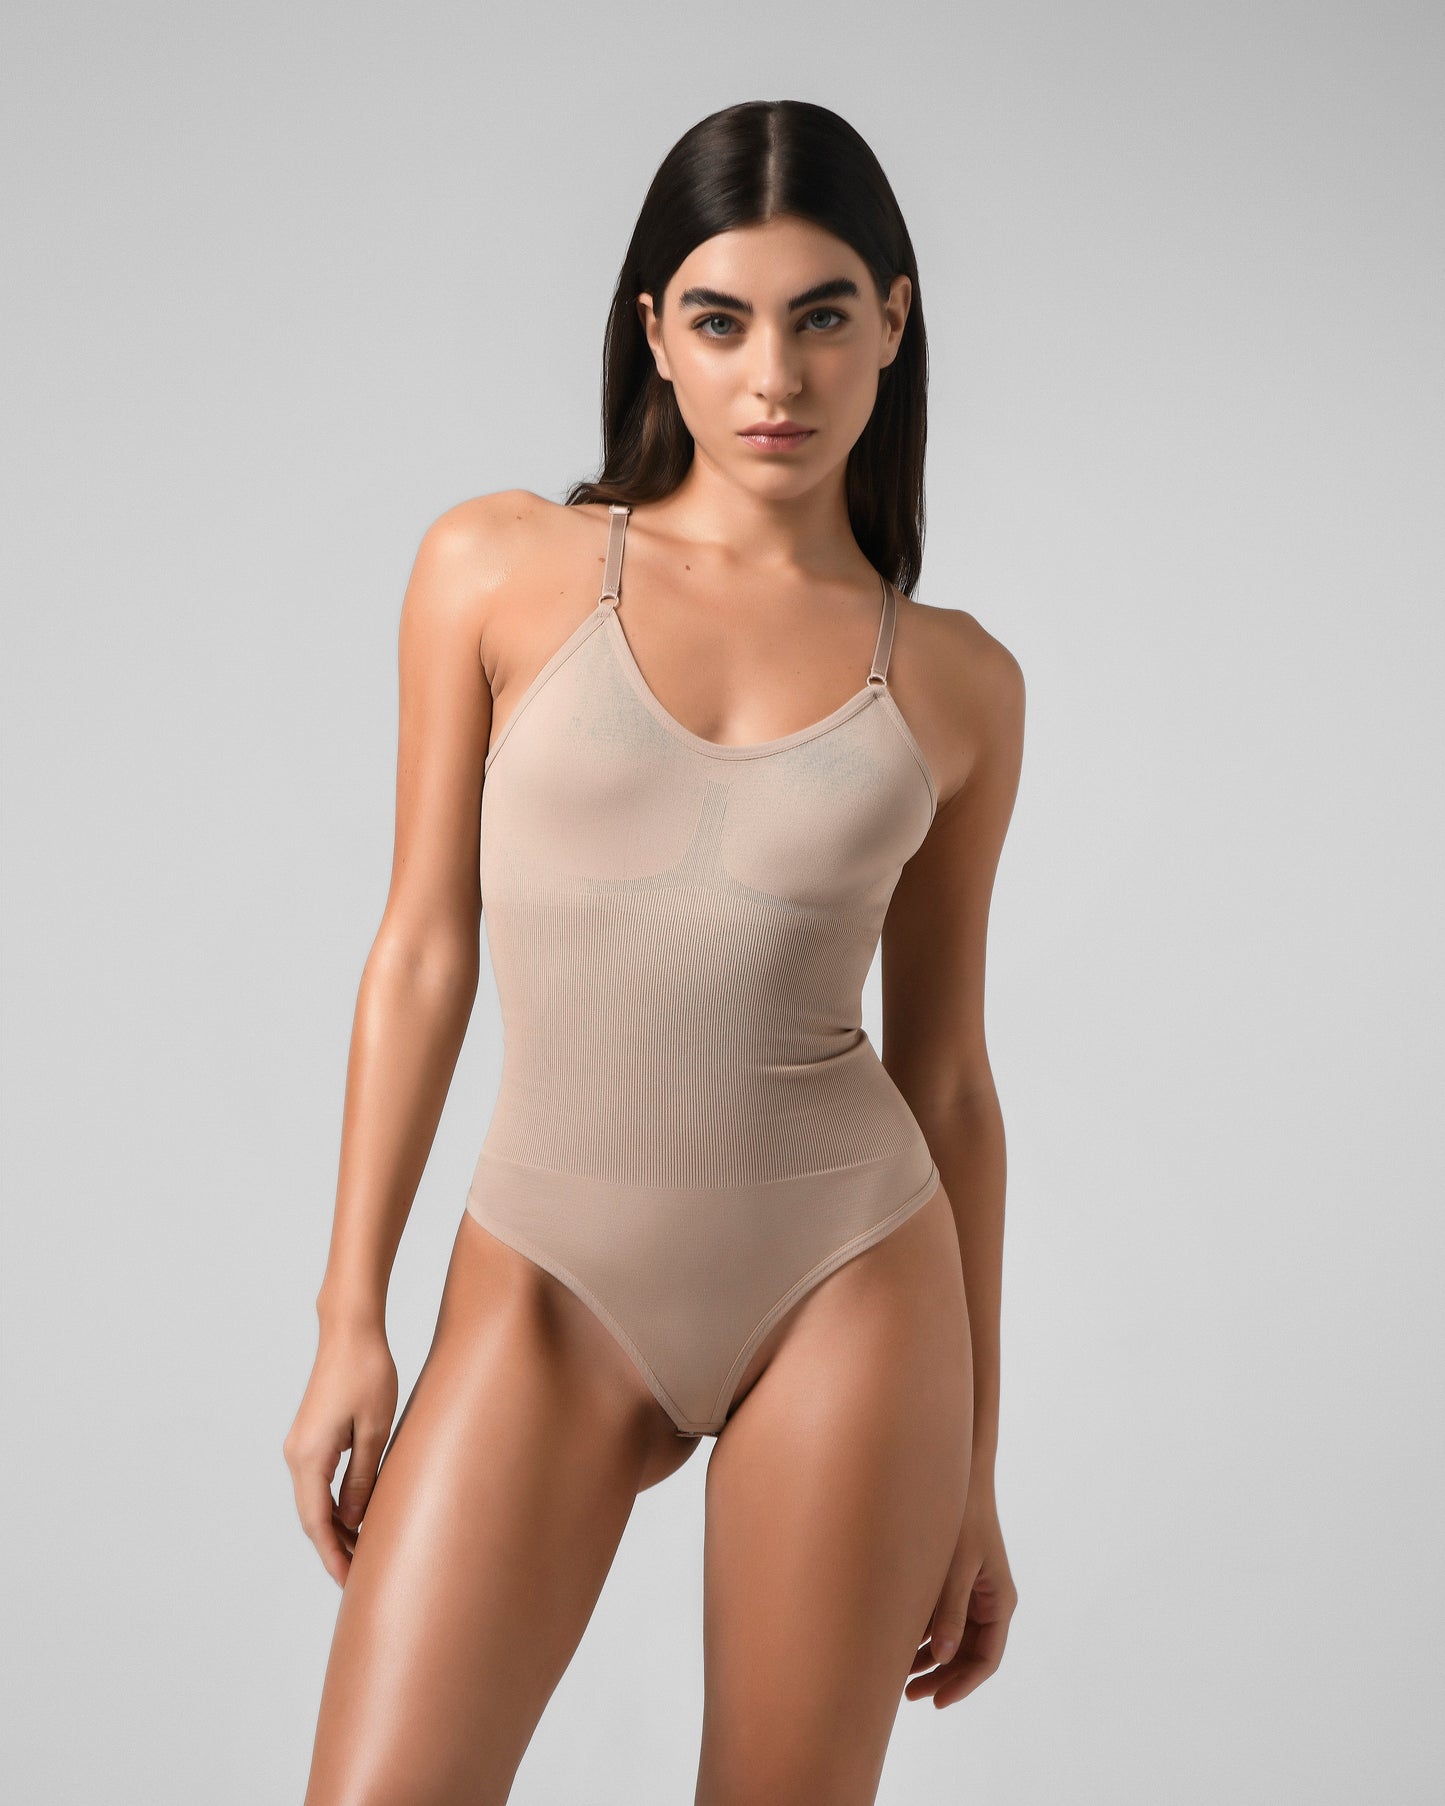 Ploppy Dolly bodysuit shapewear comes in thong and full body